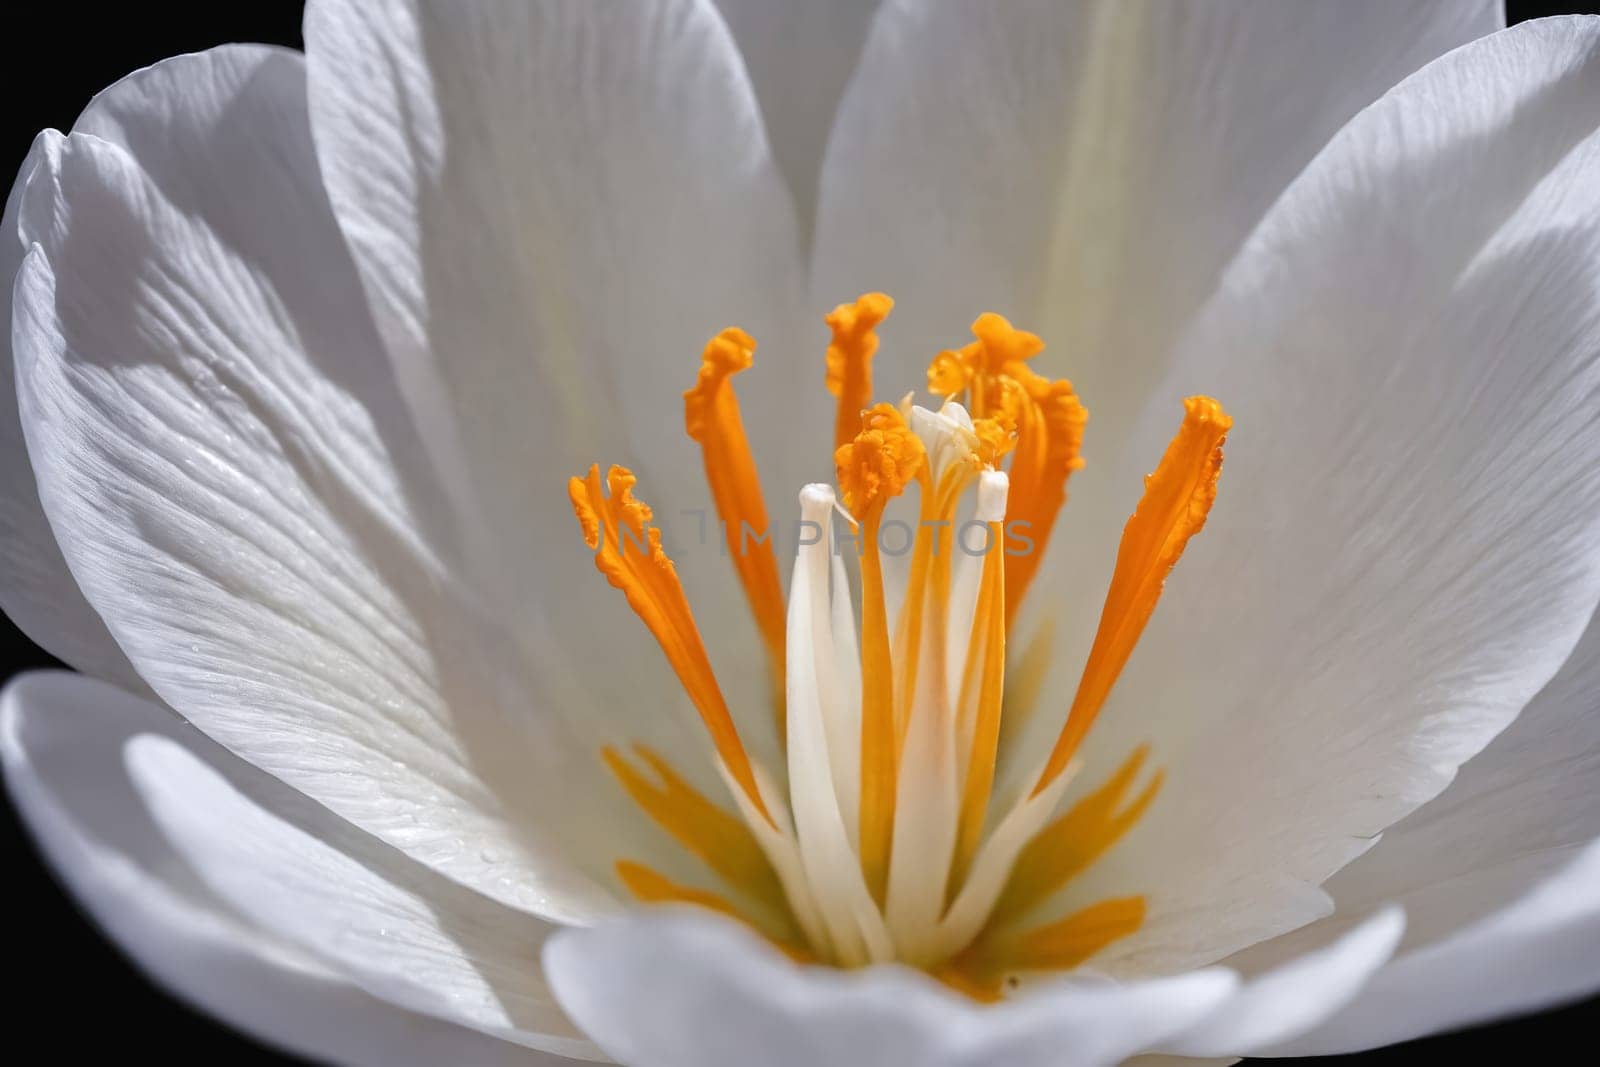 This image offers a close look into the delicate intricacies of a white and yellow flower bloom. Ideal for nature-themed visual content or floral art inspiration!